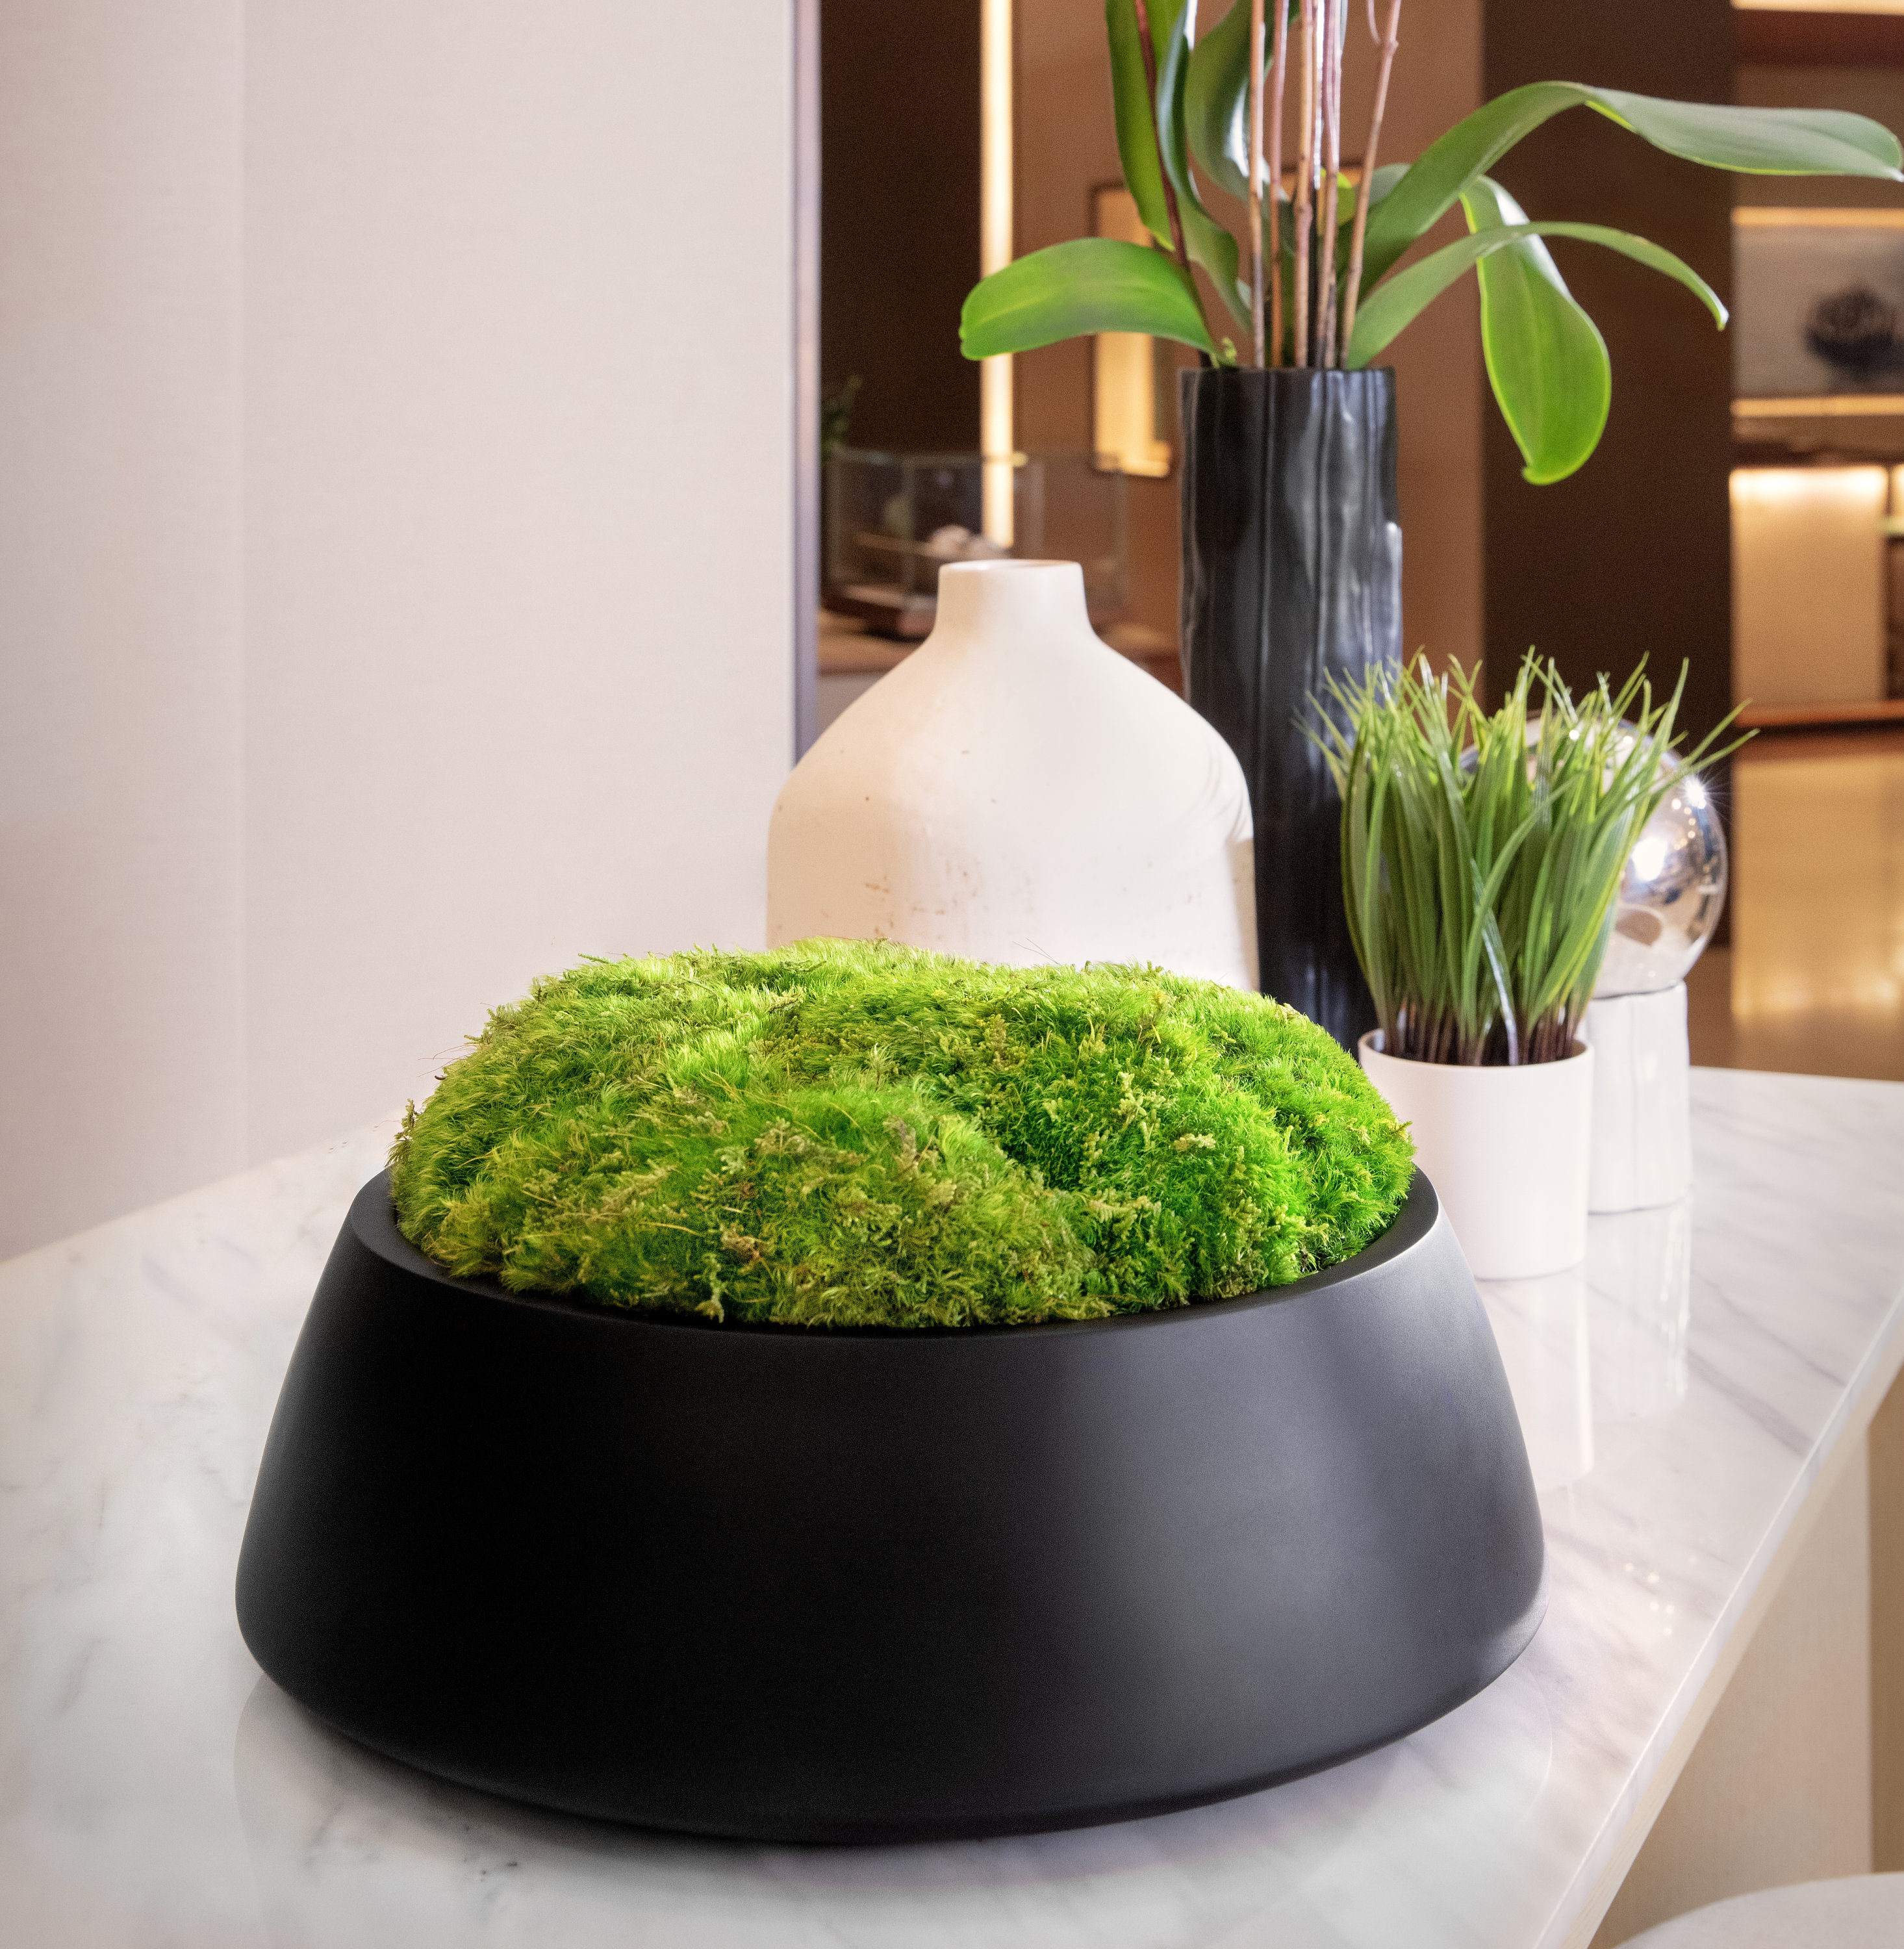 Mood Moss Arrangement in Round Bowl – Creative Displays and